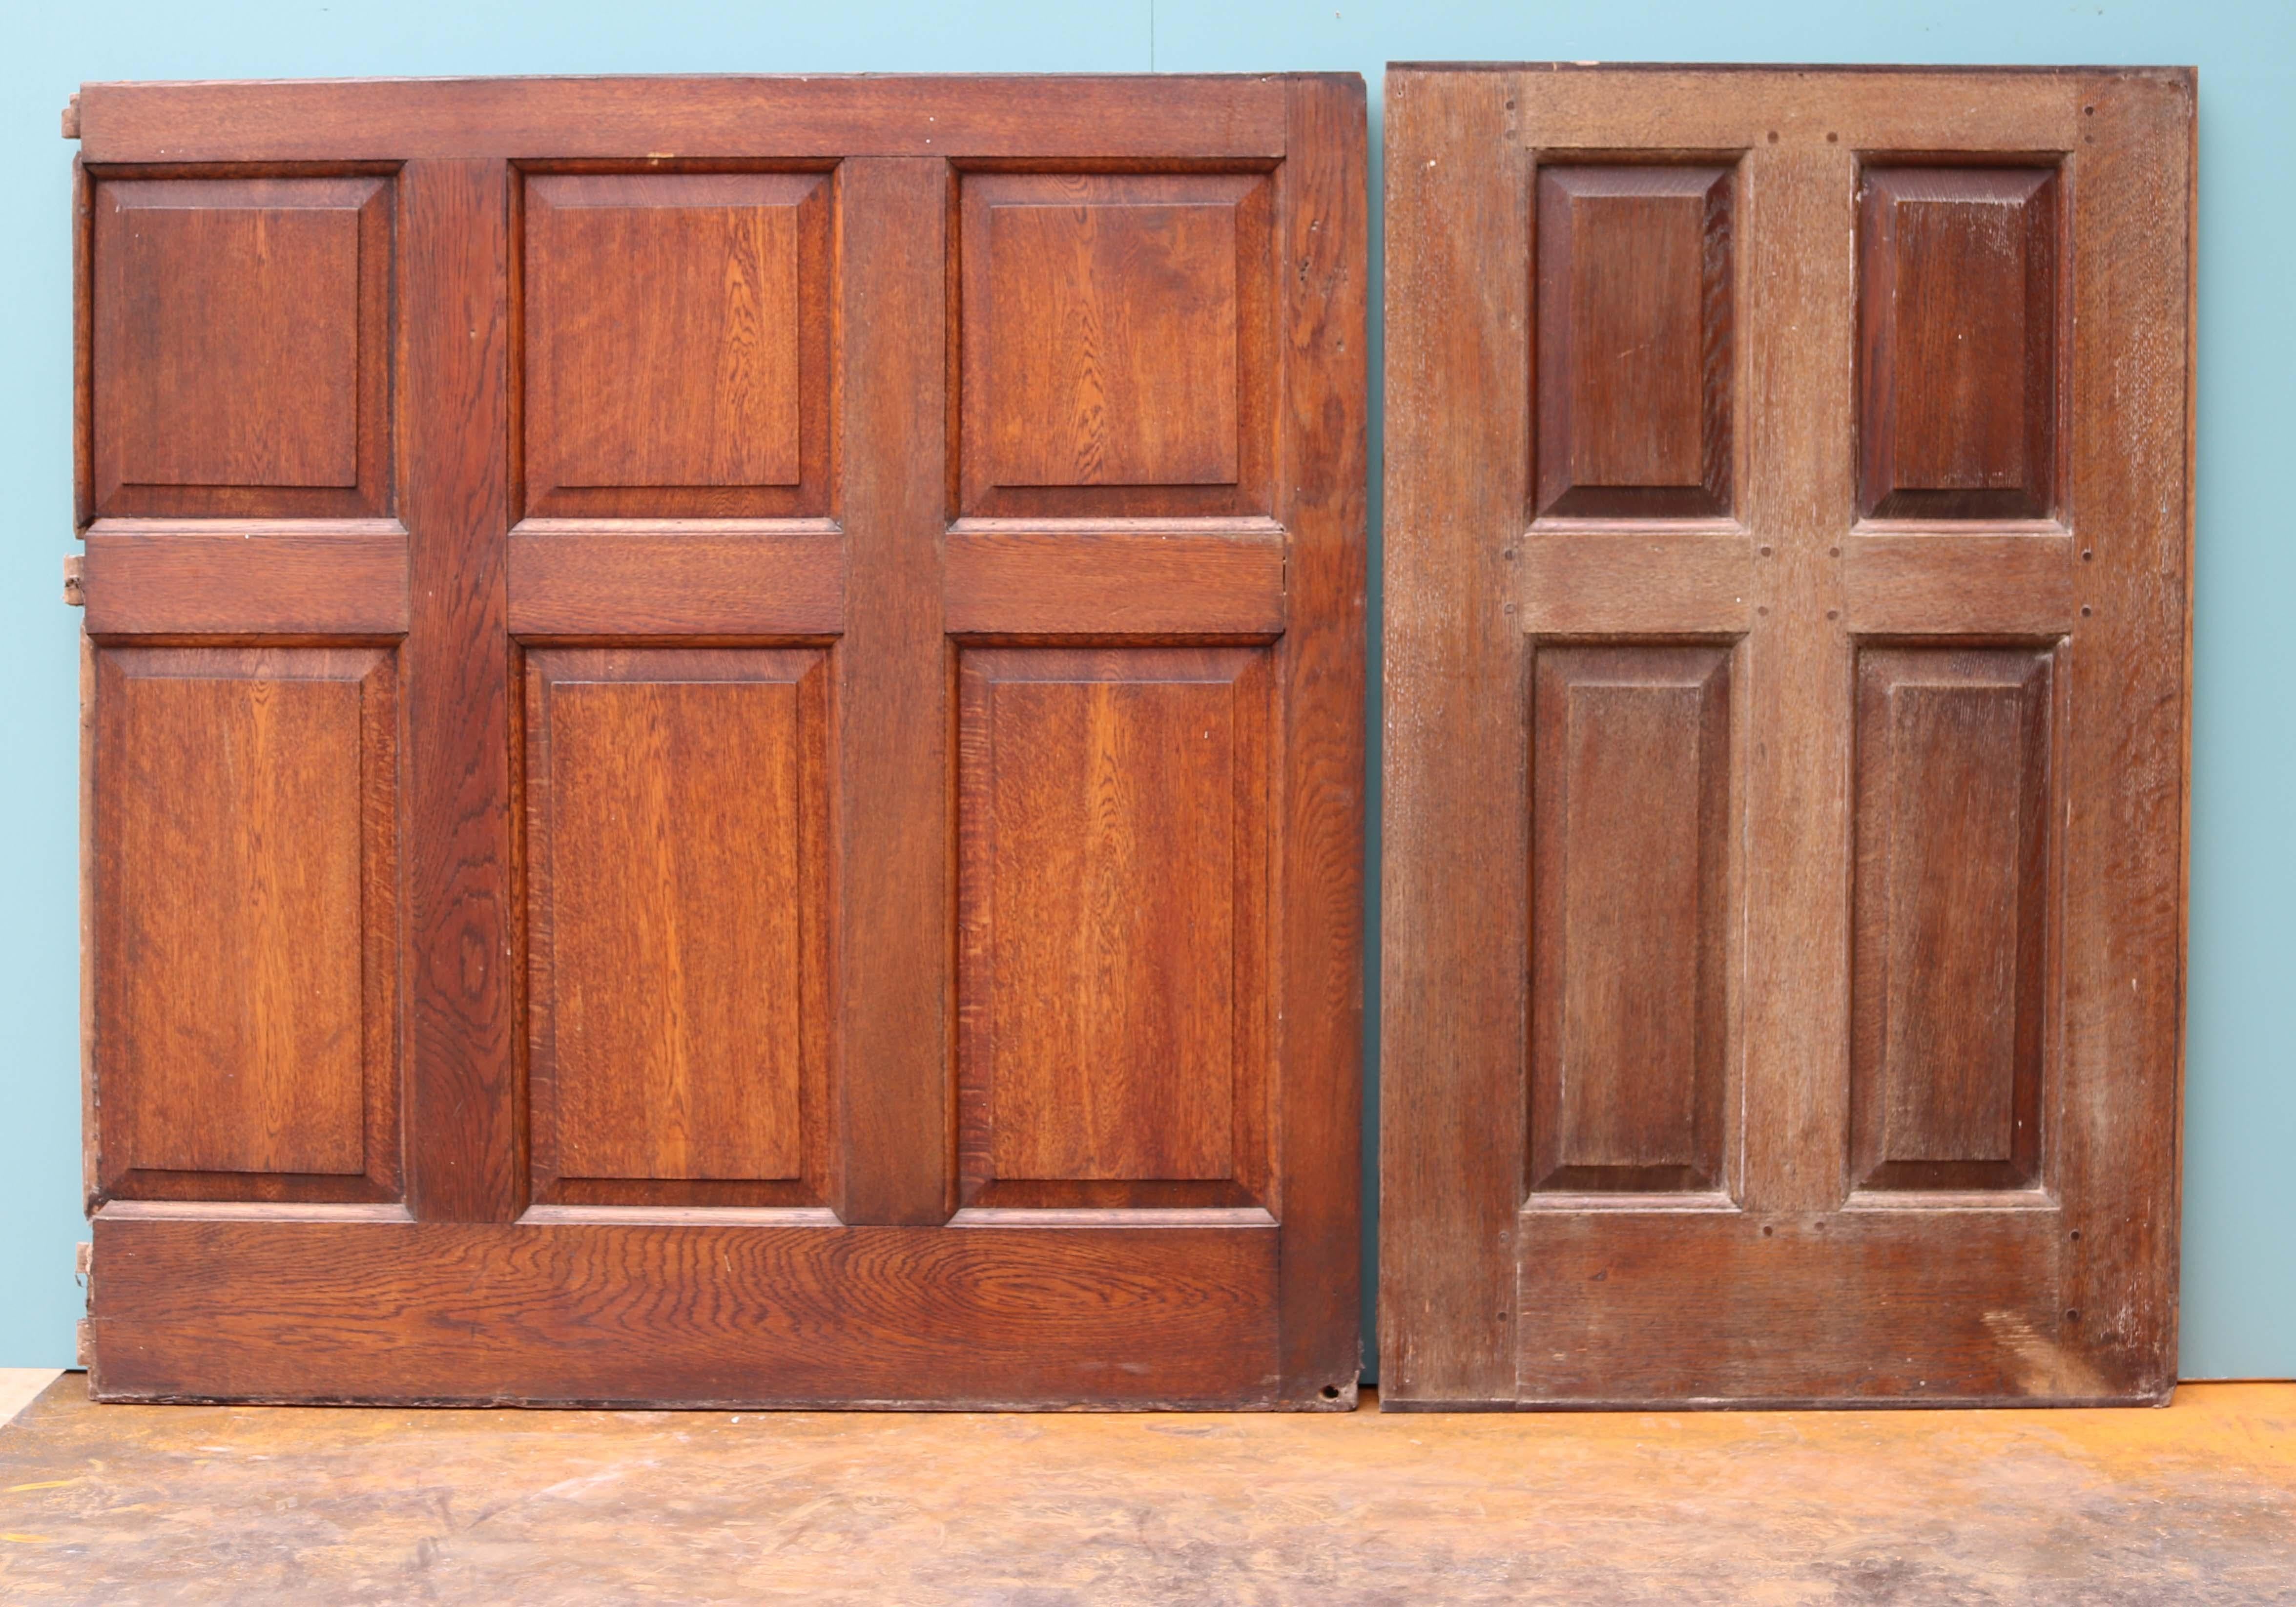 About:

There are four pieces of paneling in this lot, totaling 5.8 linear meters. Raised and fielded panels with peg joints. 

Condition report:

Small losses and scuffs. Generally a uniform finish.

Style:

Victorian, Edwardian,